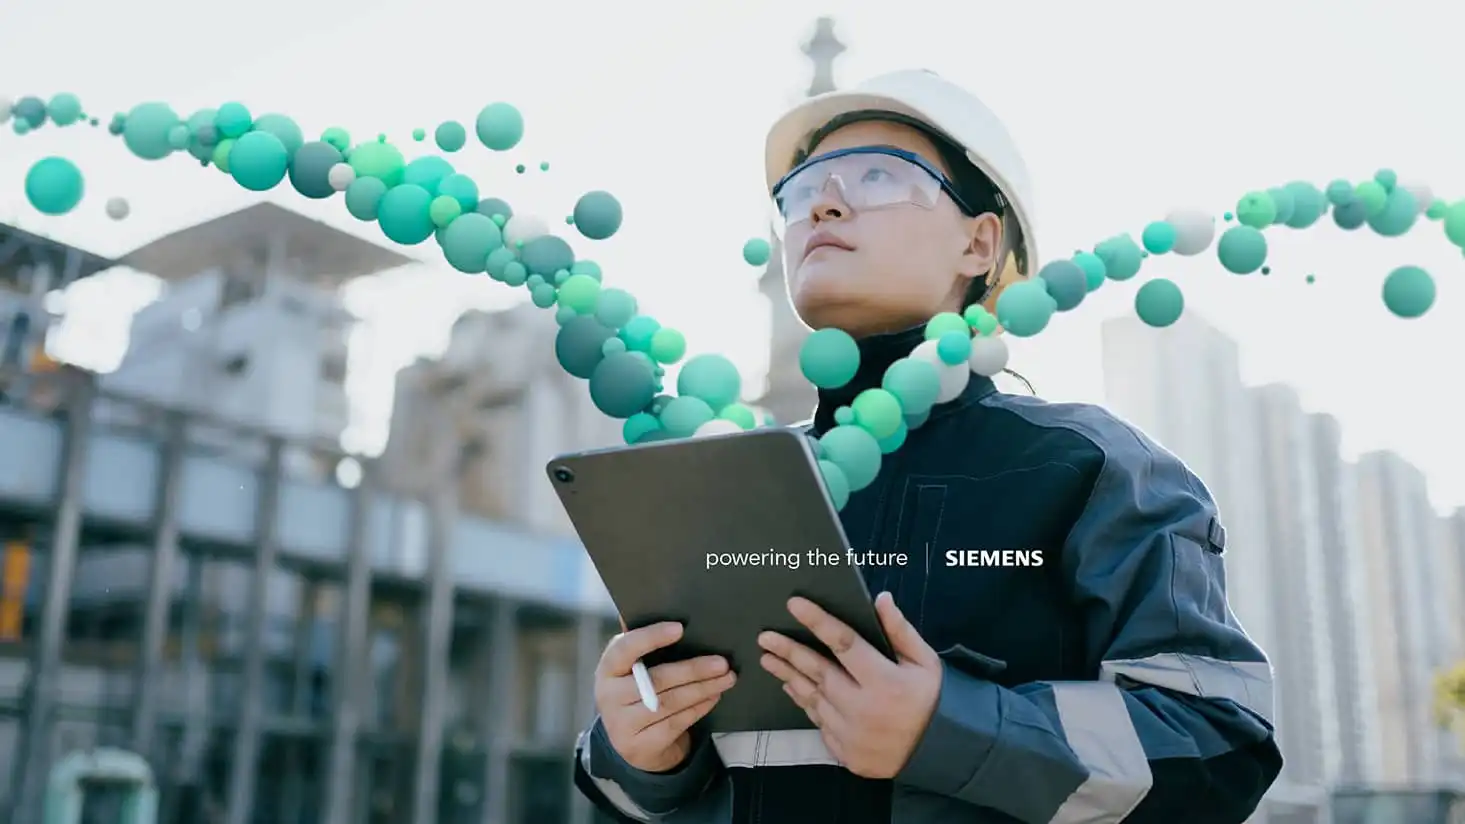 Siemens' technology that helps a young engineer